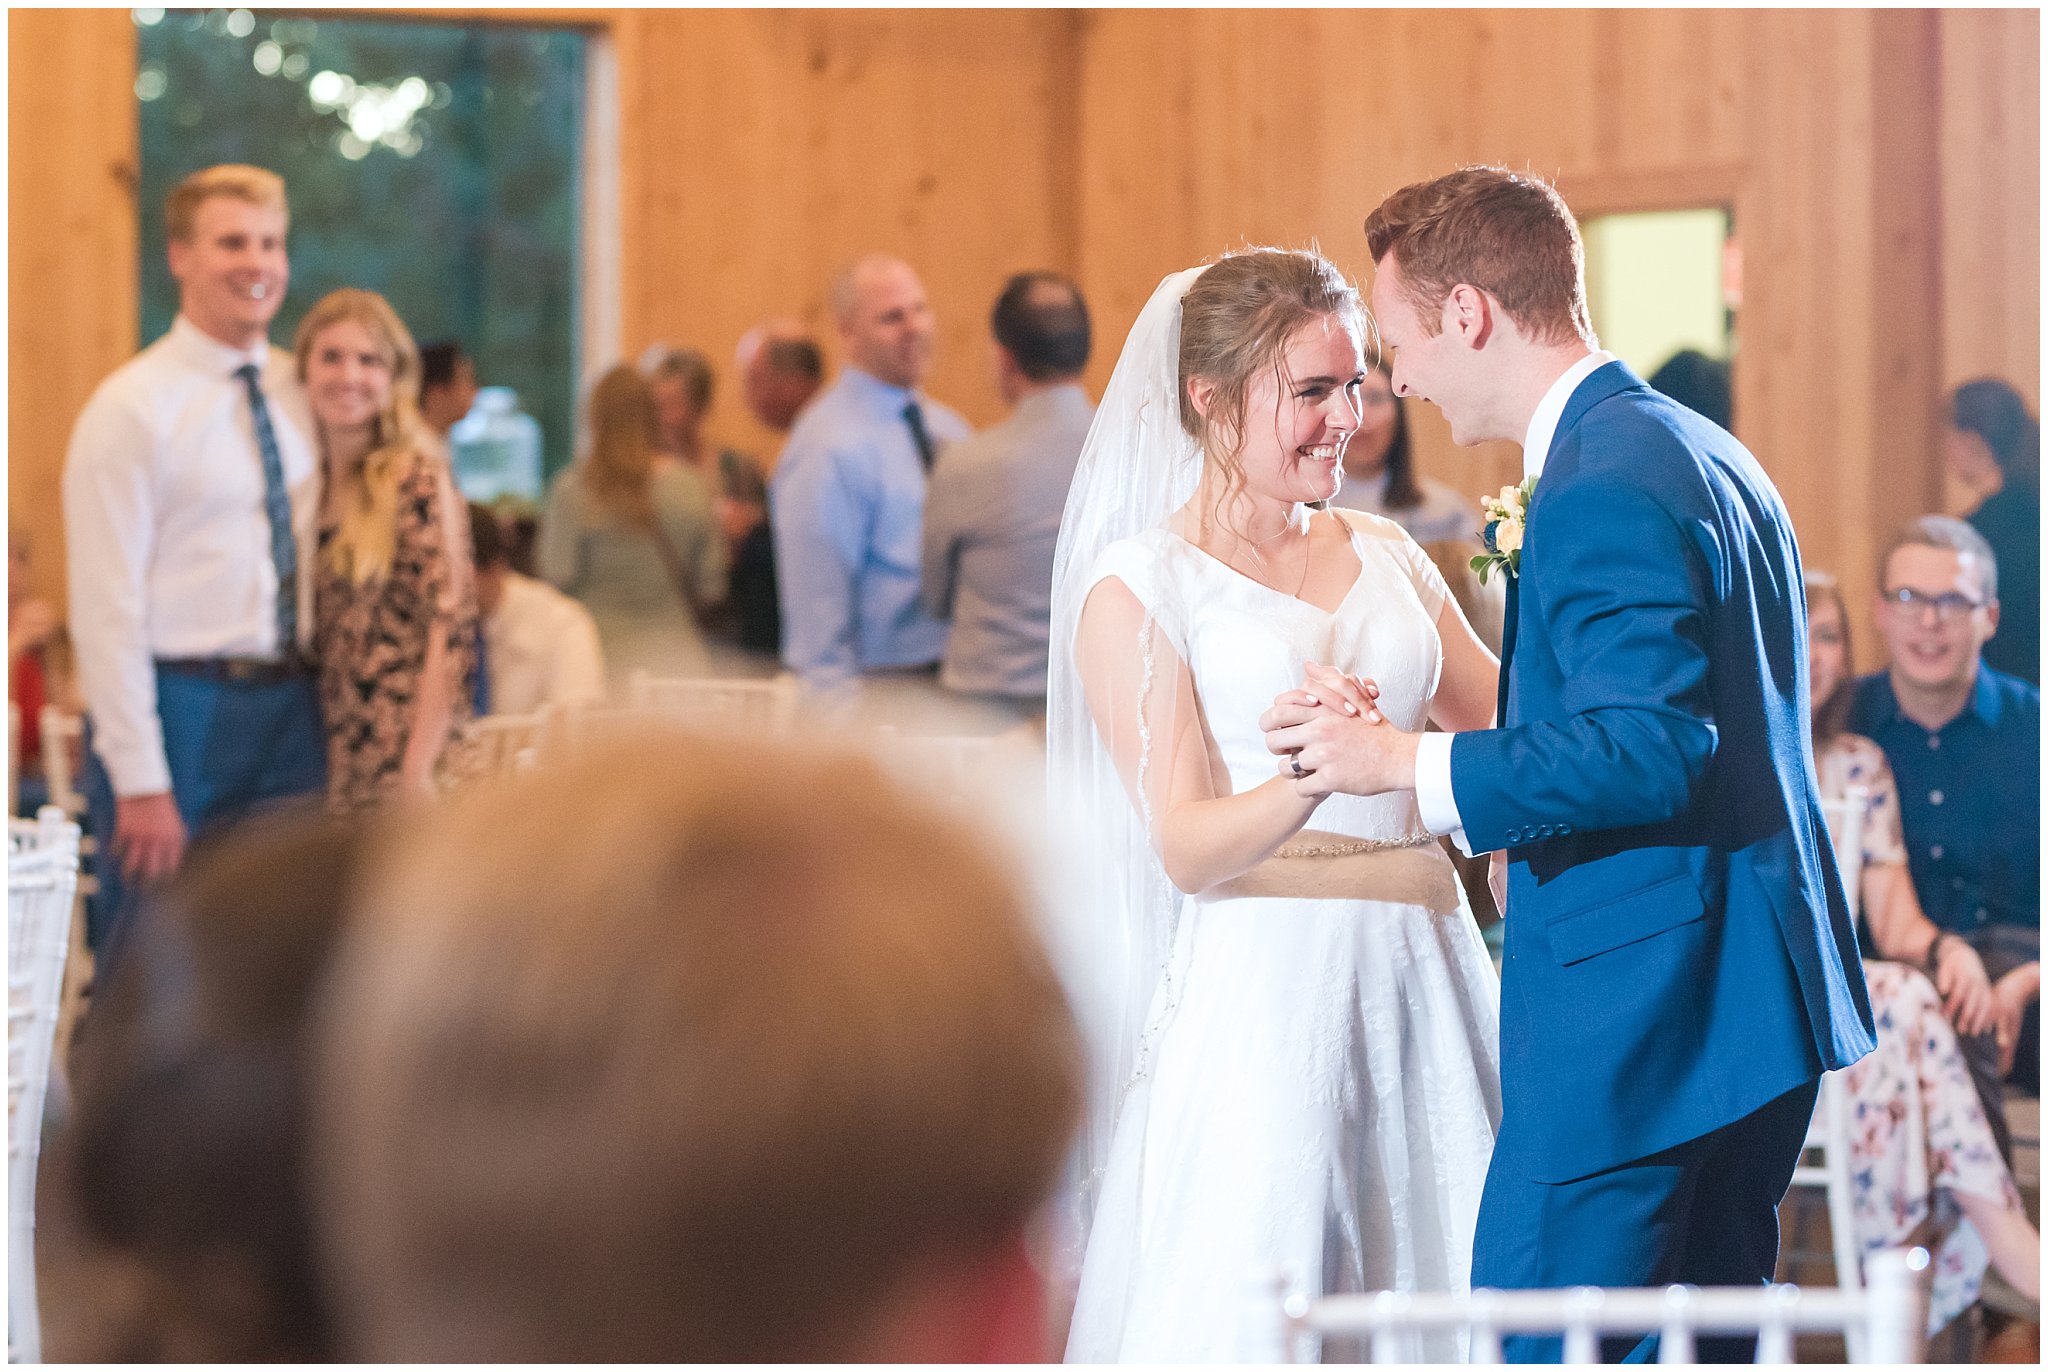 First dance with bride and groom while another couple watches at Oak Hills Reception and Event Center | Top Utah Wedding and Couples Photos 2019 | Jessie and Dallin Photography